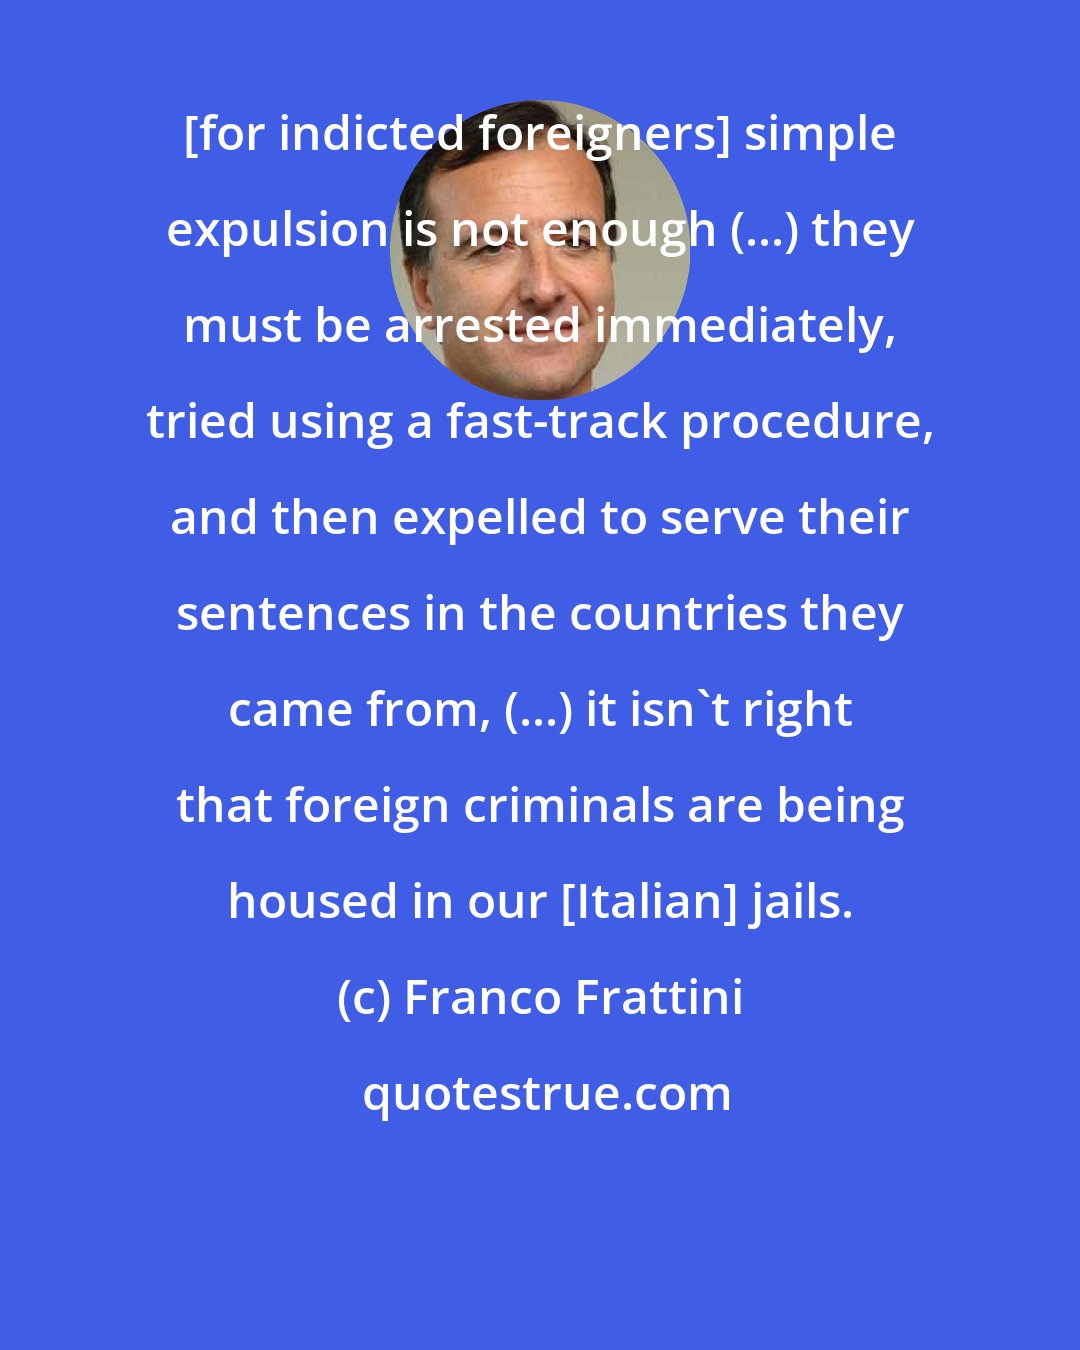 Franco Frattini: [for indicted foreigners] simple expulsion is not enough (...) they must be arrested immediately, tried using a fast-track procedure, and then expelled to serve their sentences in the countries they came from, (...) it isn't right that foreign criminals are being housed in our [Italian] jails.